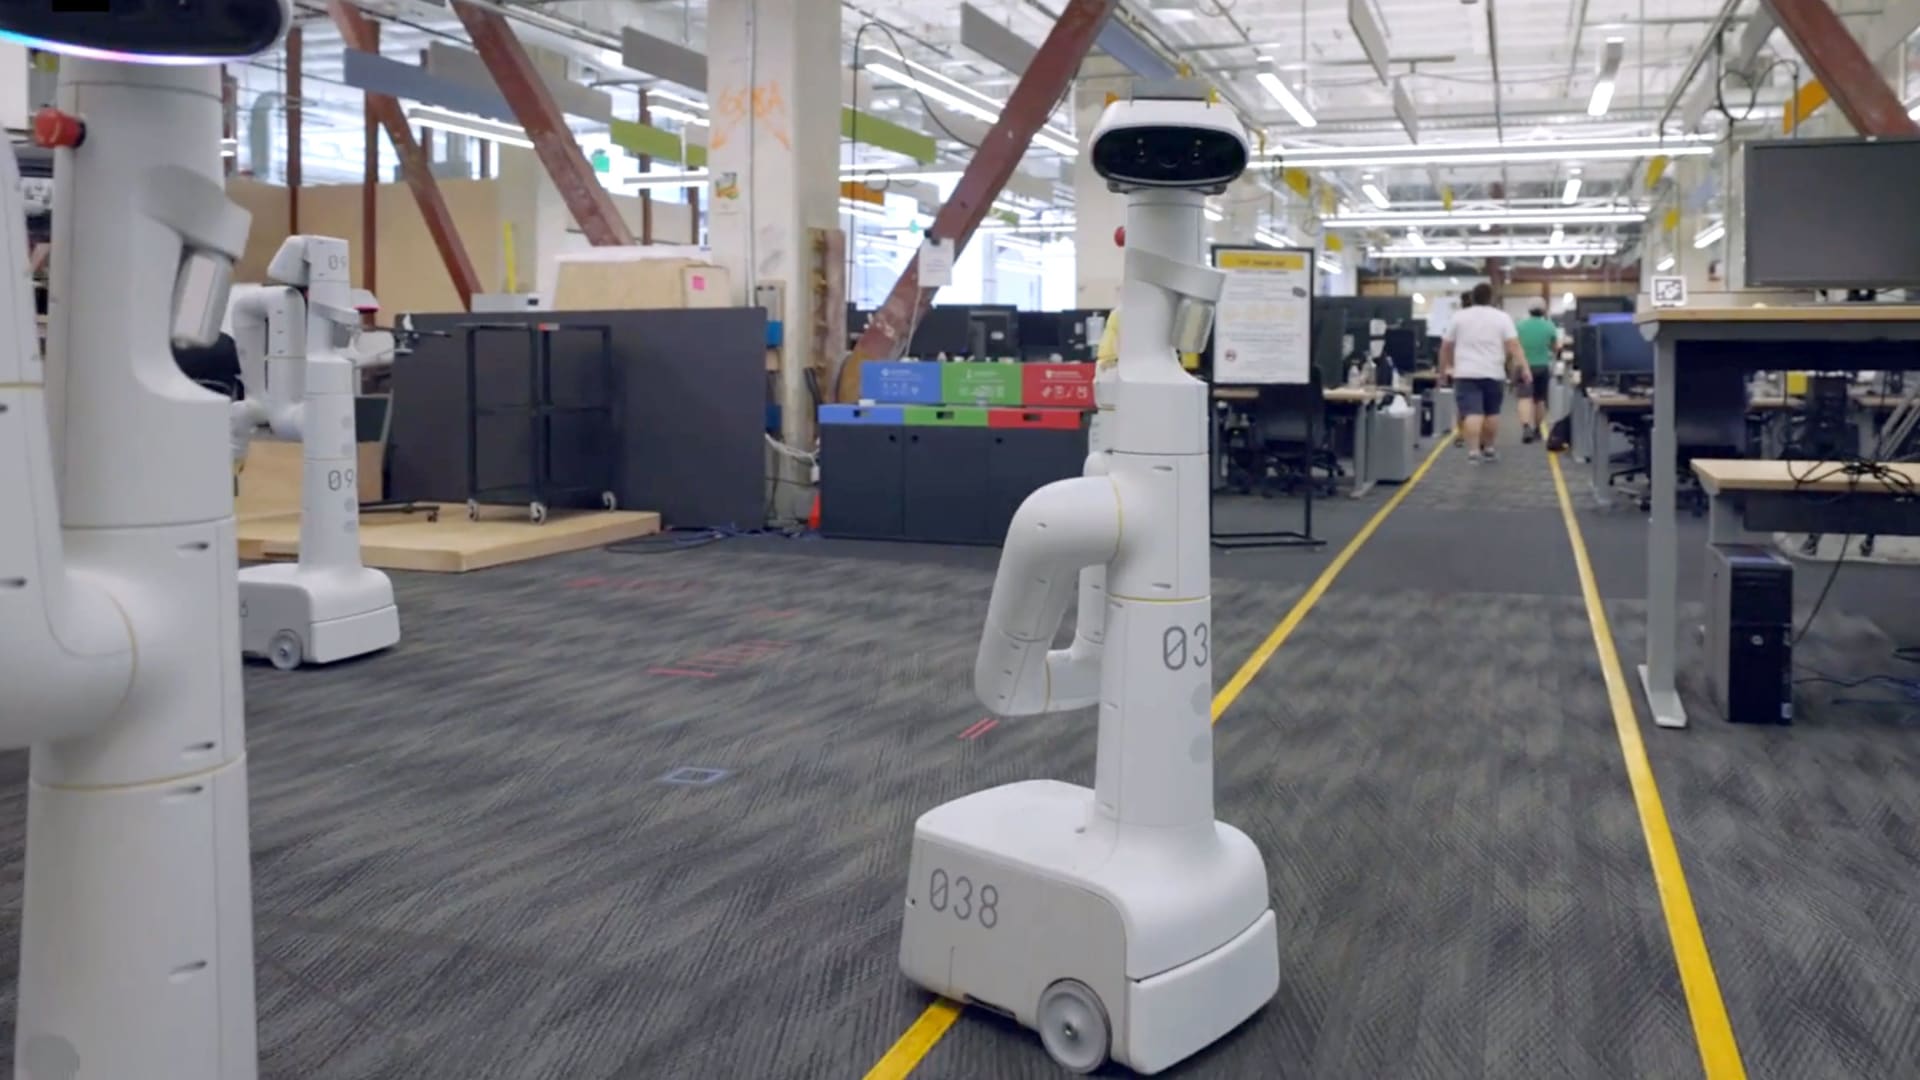 Google's robots are made by the startup Everyday Robots.